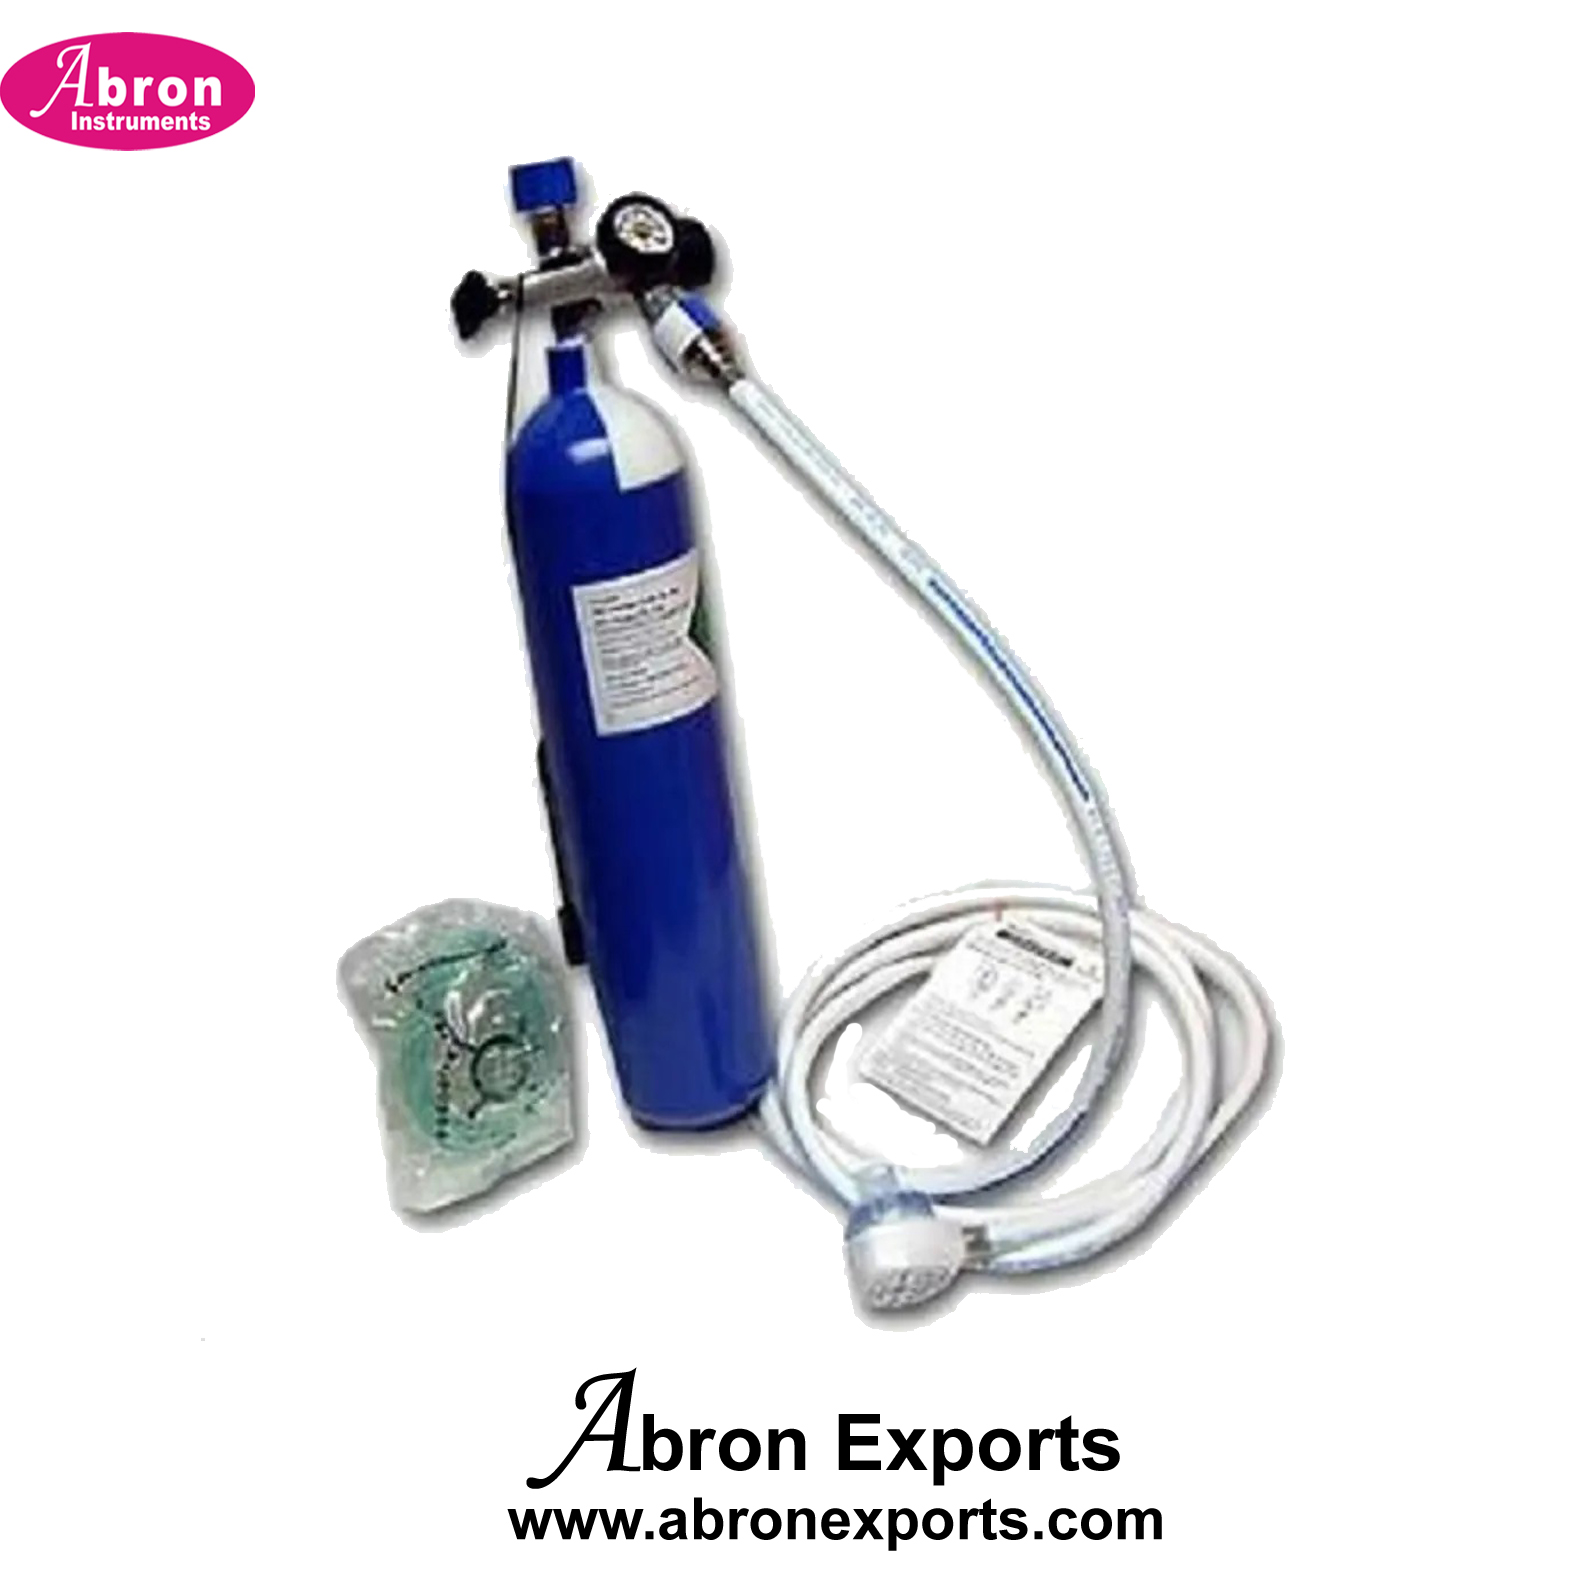 Cylinder ENTONOX 47 Liter 50+50 homogenous gas mixture containing 50% nitrous oxide and oxygen by volume compressed in a cylinder Pain releaver Abron ABM-1140B47 